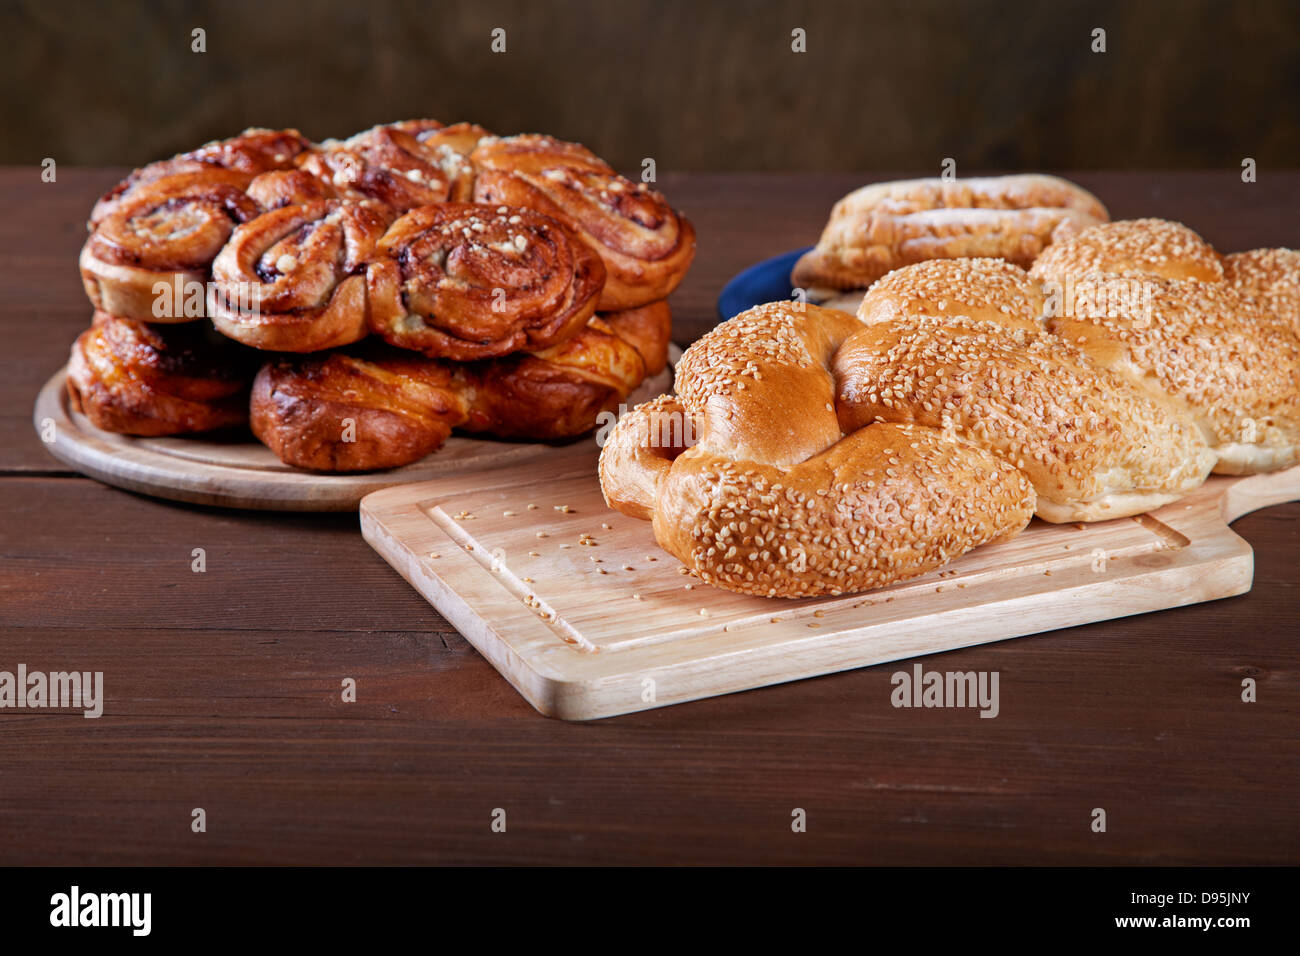 Still-life with rolls and pies on a kitchen table Stock Photo